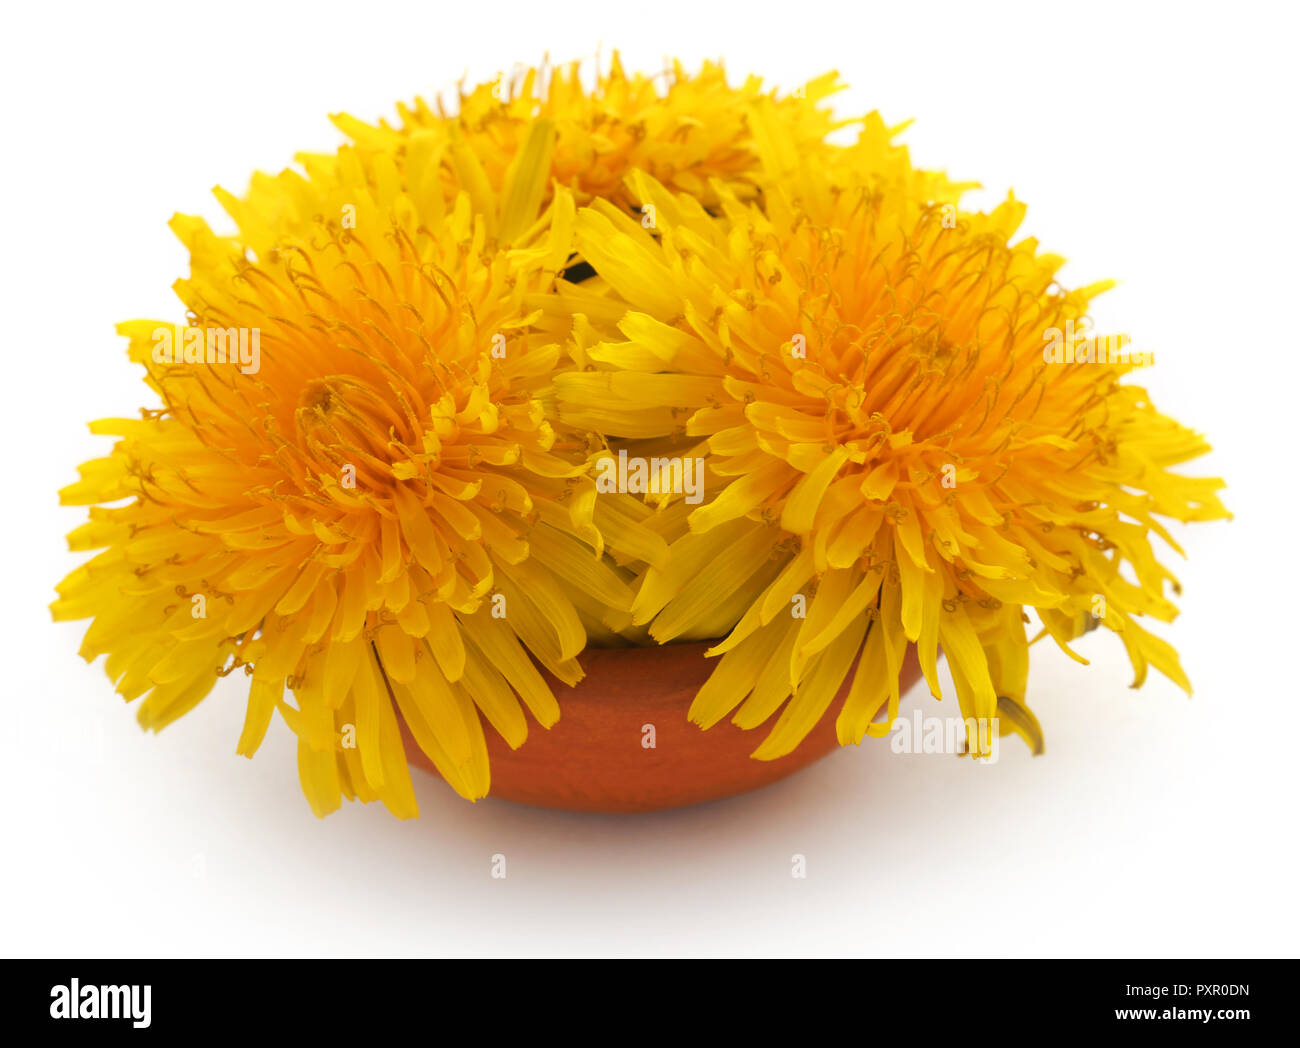 Medicinal dandelion in a bowl over white background Stock Photo